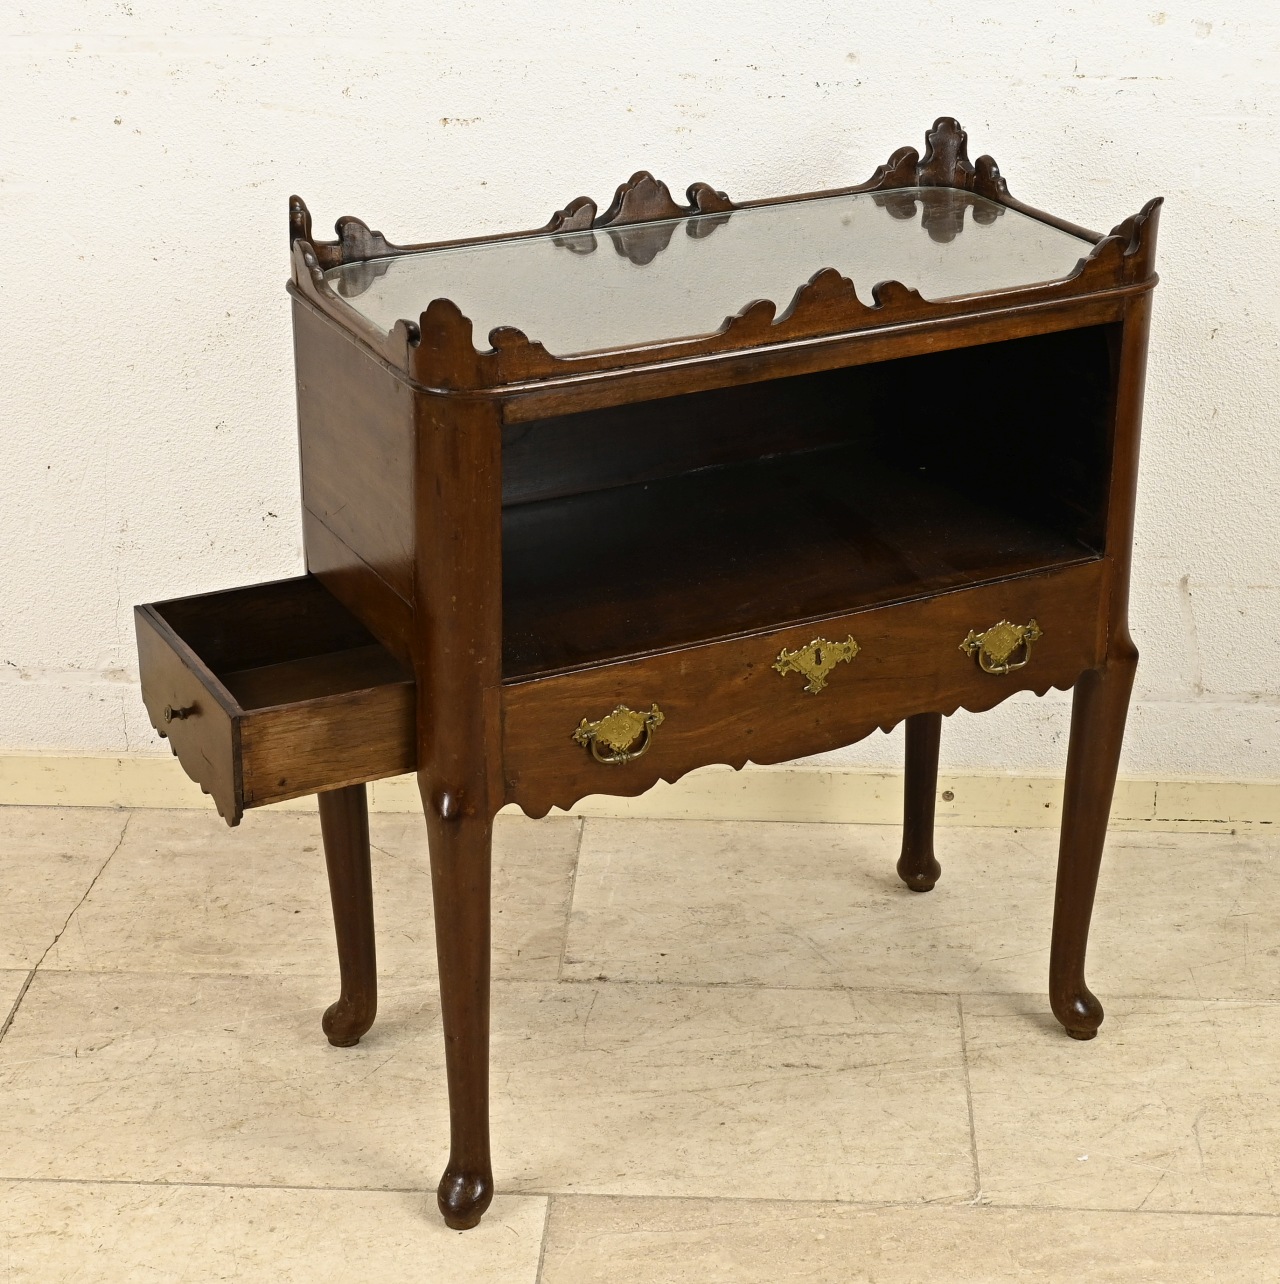 Cabinet with side drawer (mahogany) - Image 2 of 2